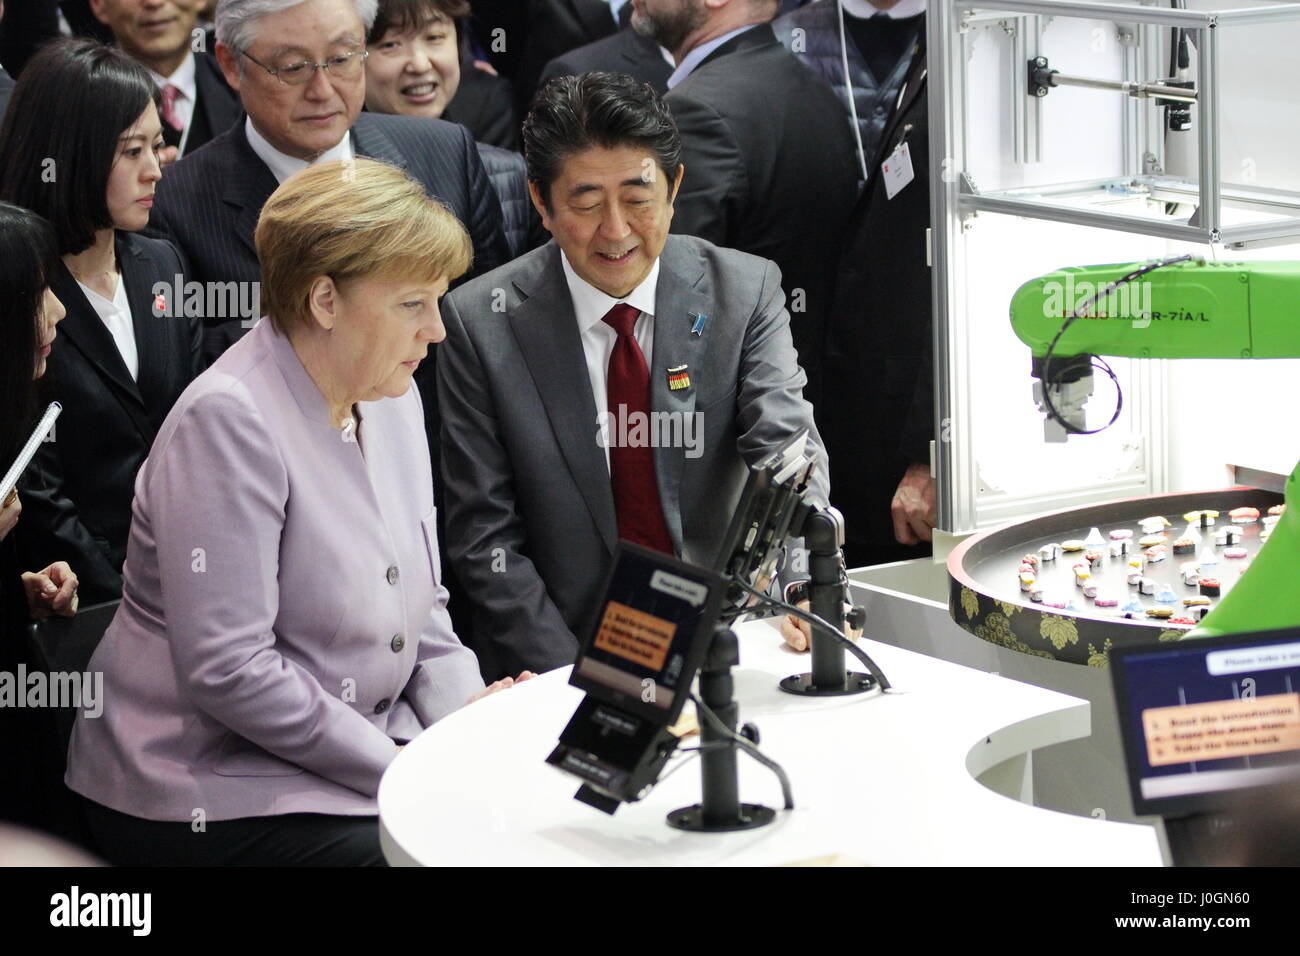 Hanover, Germany. 20th March, 2017. opening walk with Angela Merkel, Federal Cancellor of Germany, and Shinzo Abe, Prime Minister of Japan, exhibition stand Hitachi in Central Partner Country Pavillion Japan, CeBIT 2017, ICT trade fair, lead theme 'd!conomy - no limits'. Photocredit: Christian Lademann Stock Photo